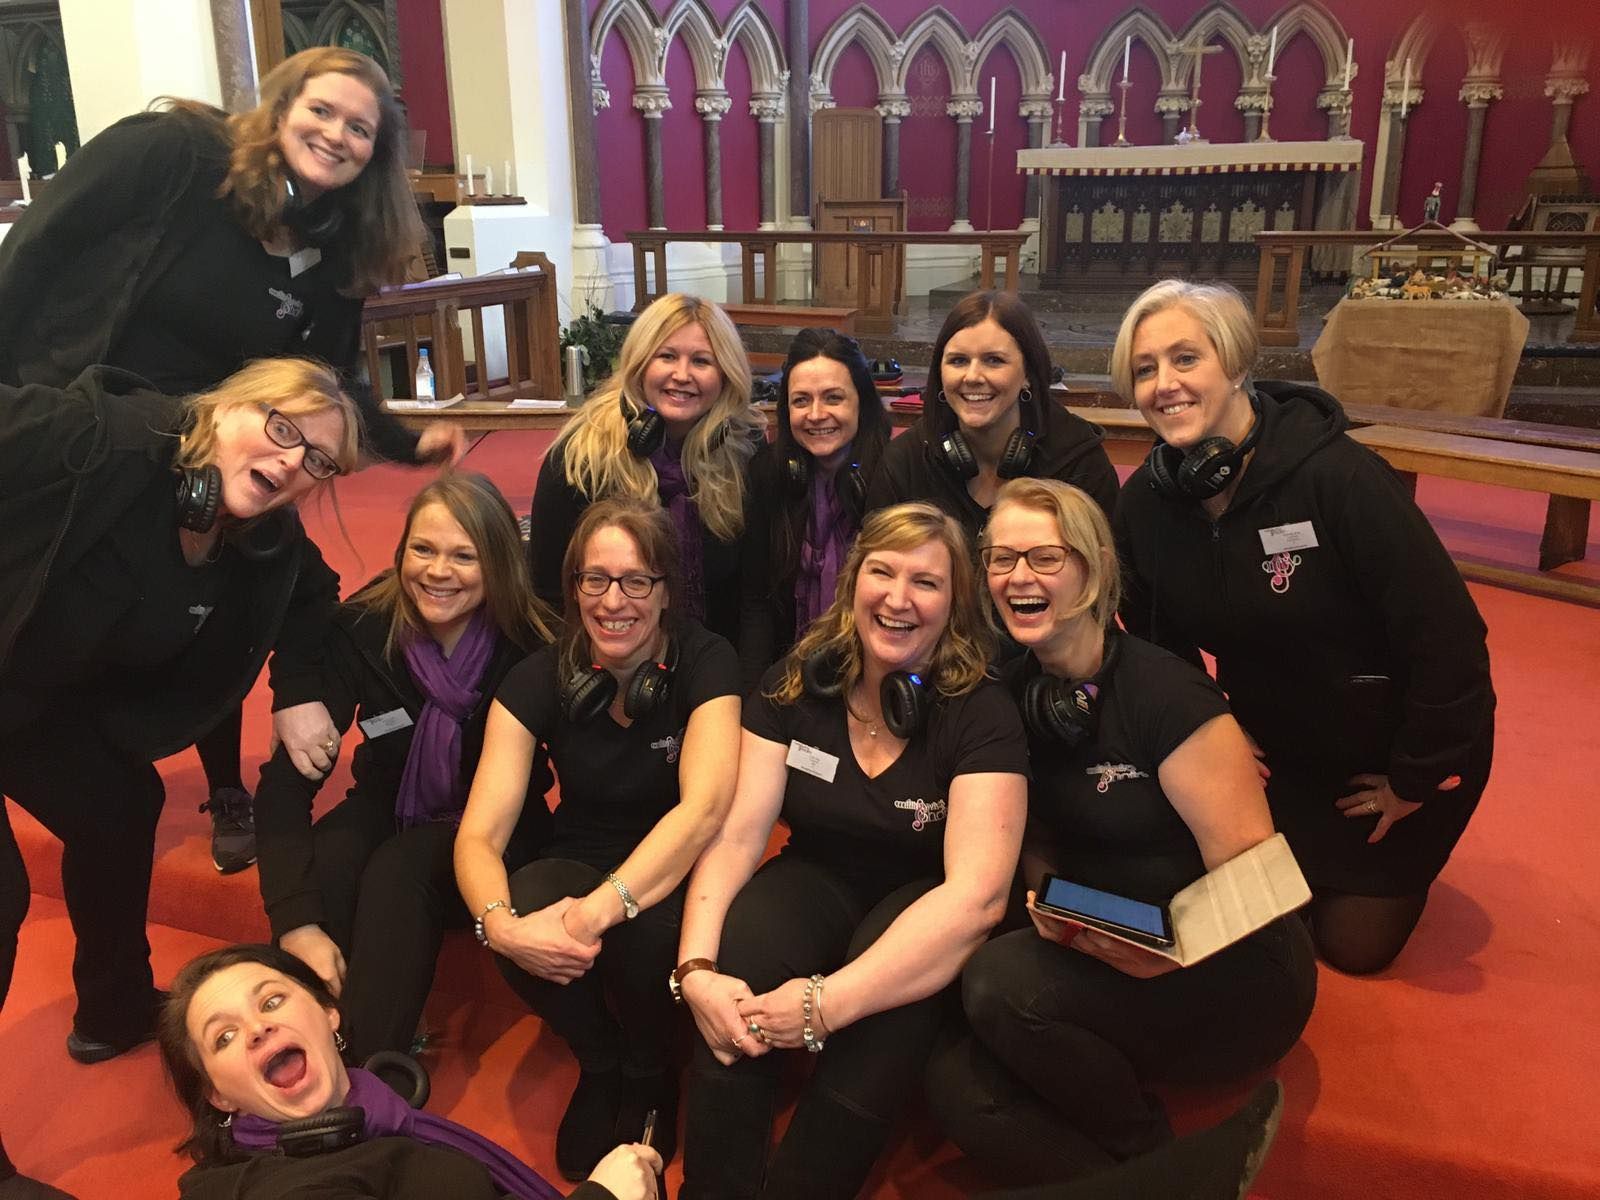 Clair with fellow members of the Culdroses Military Wives Choir